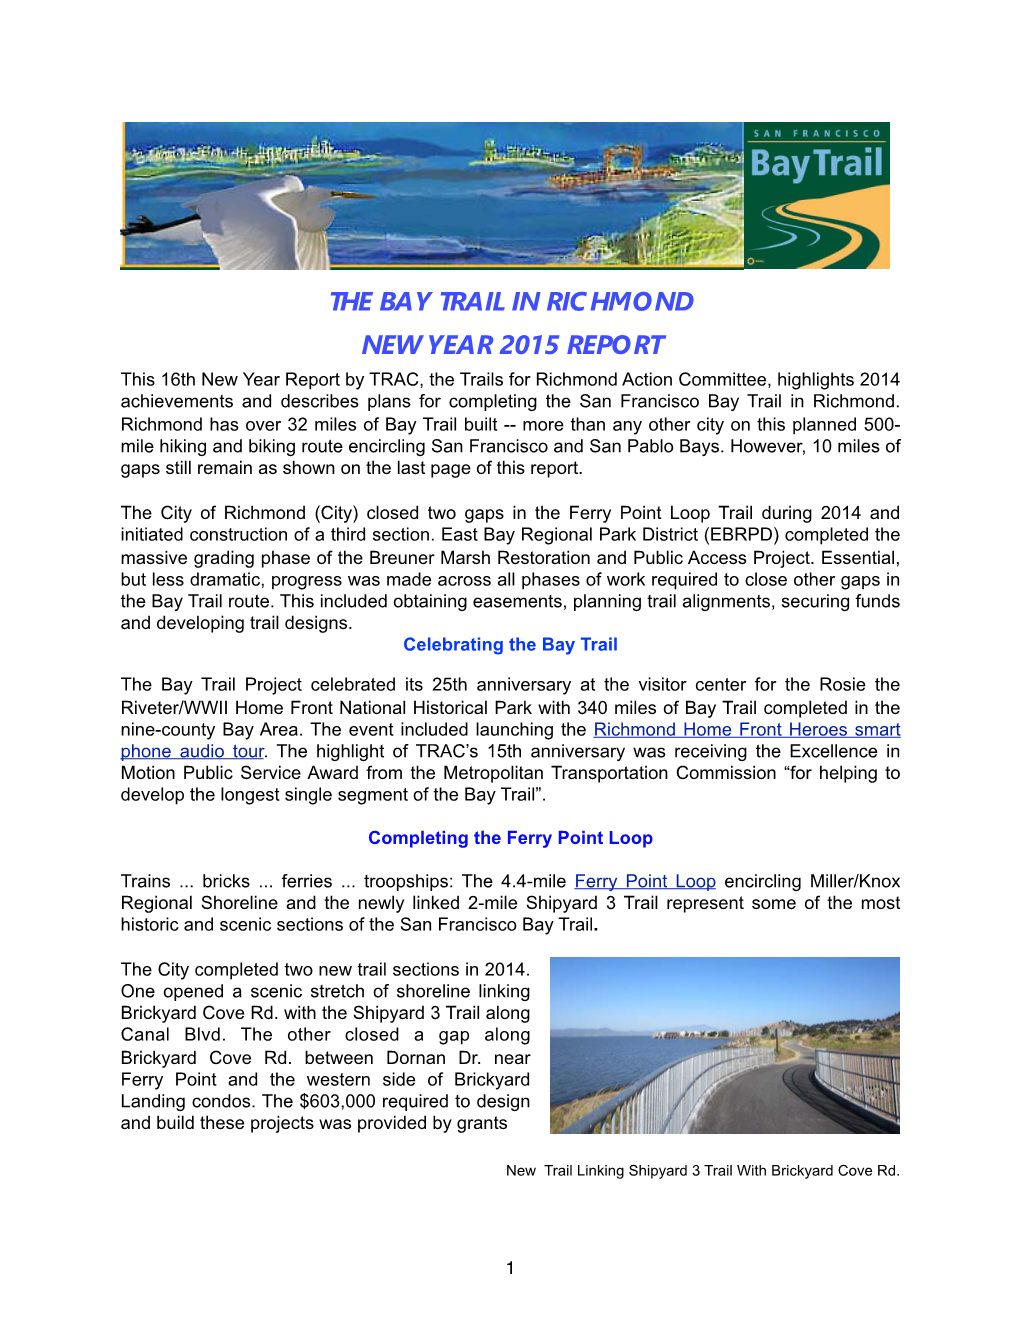 The Bay Trail in Richmond New Year 2015 Report